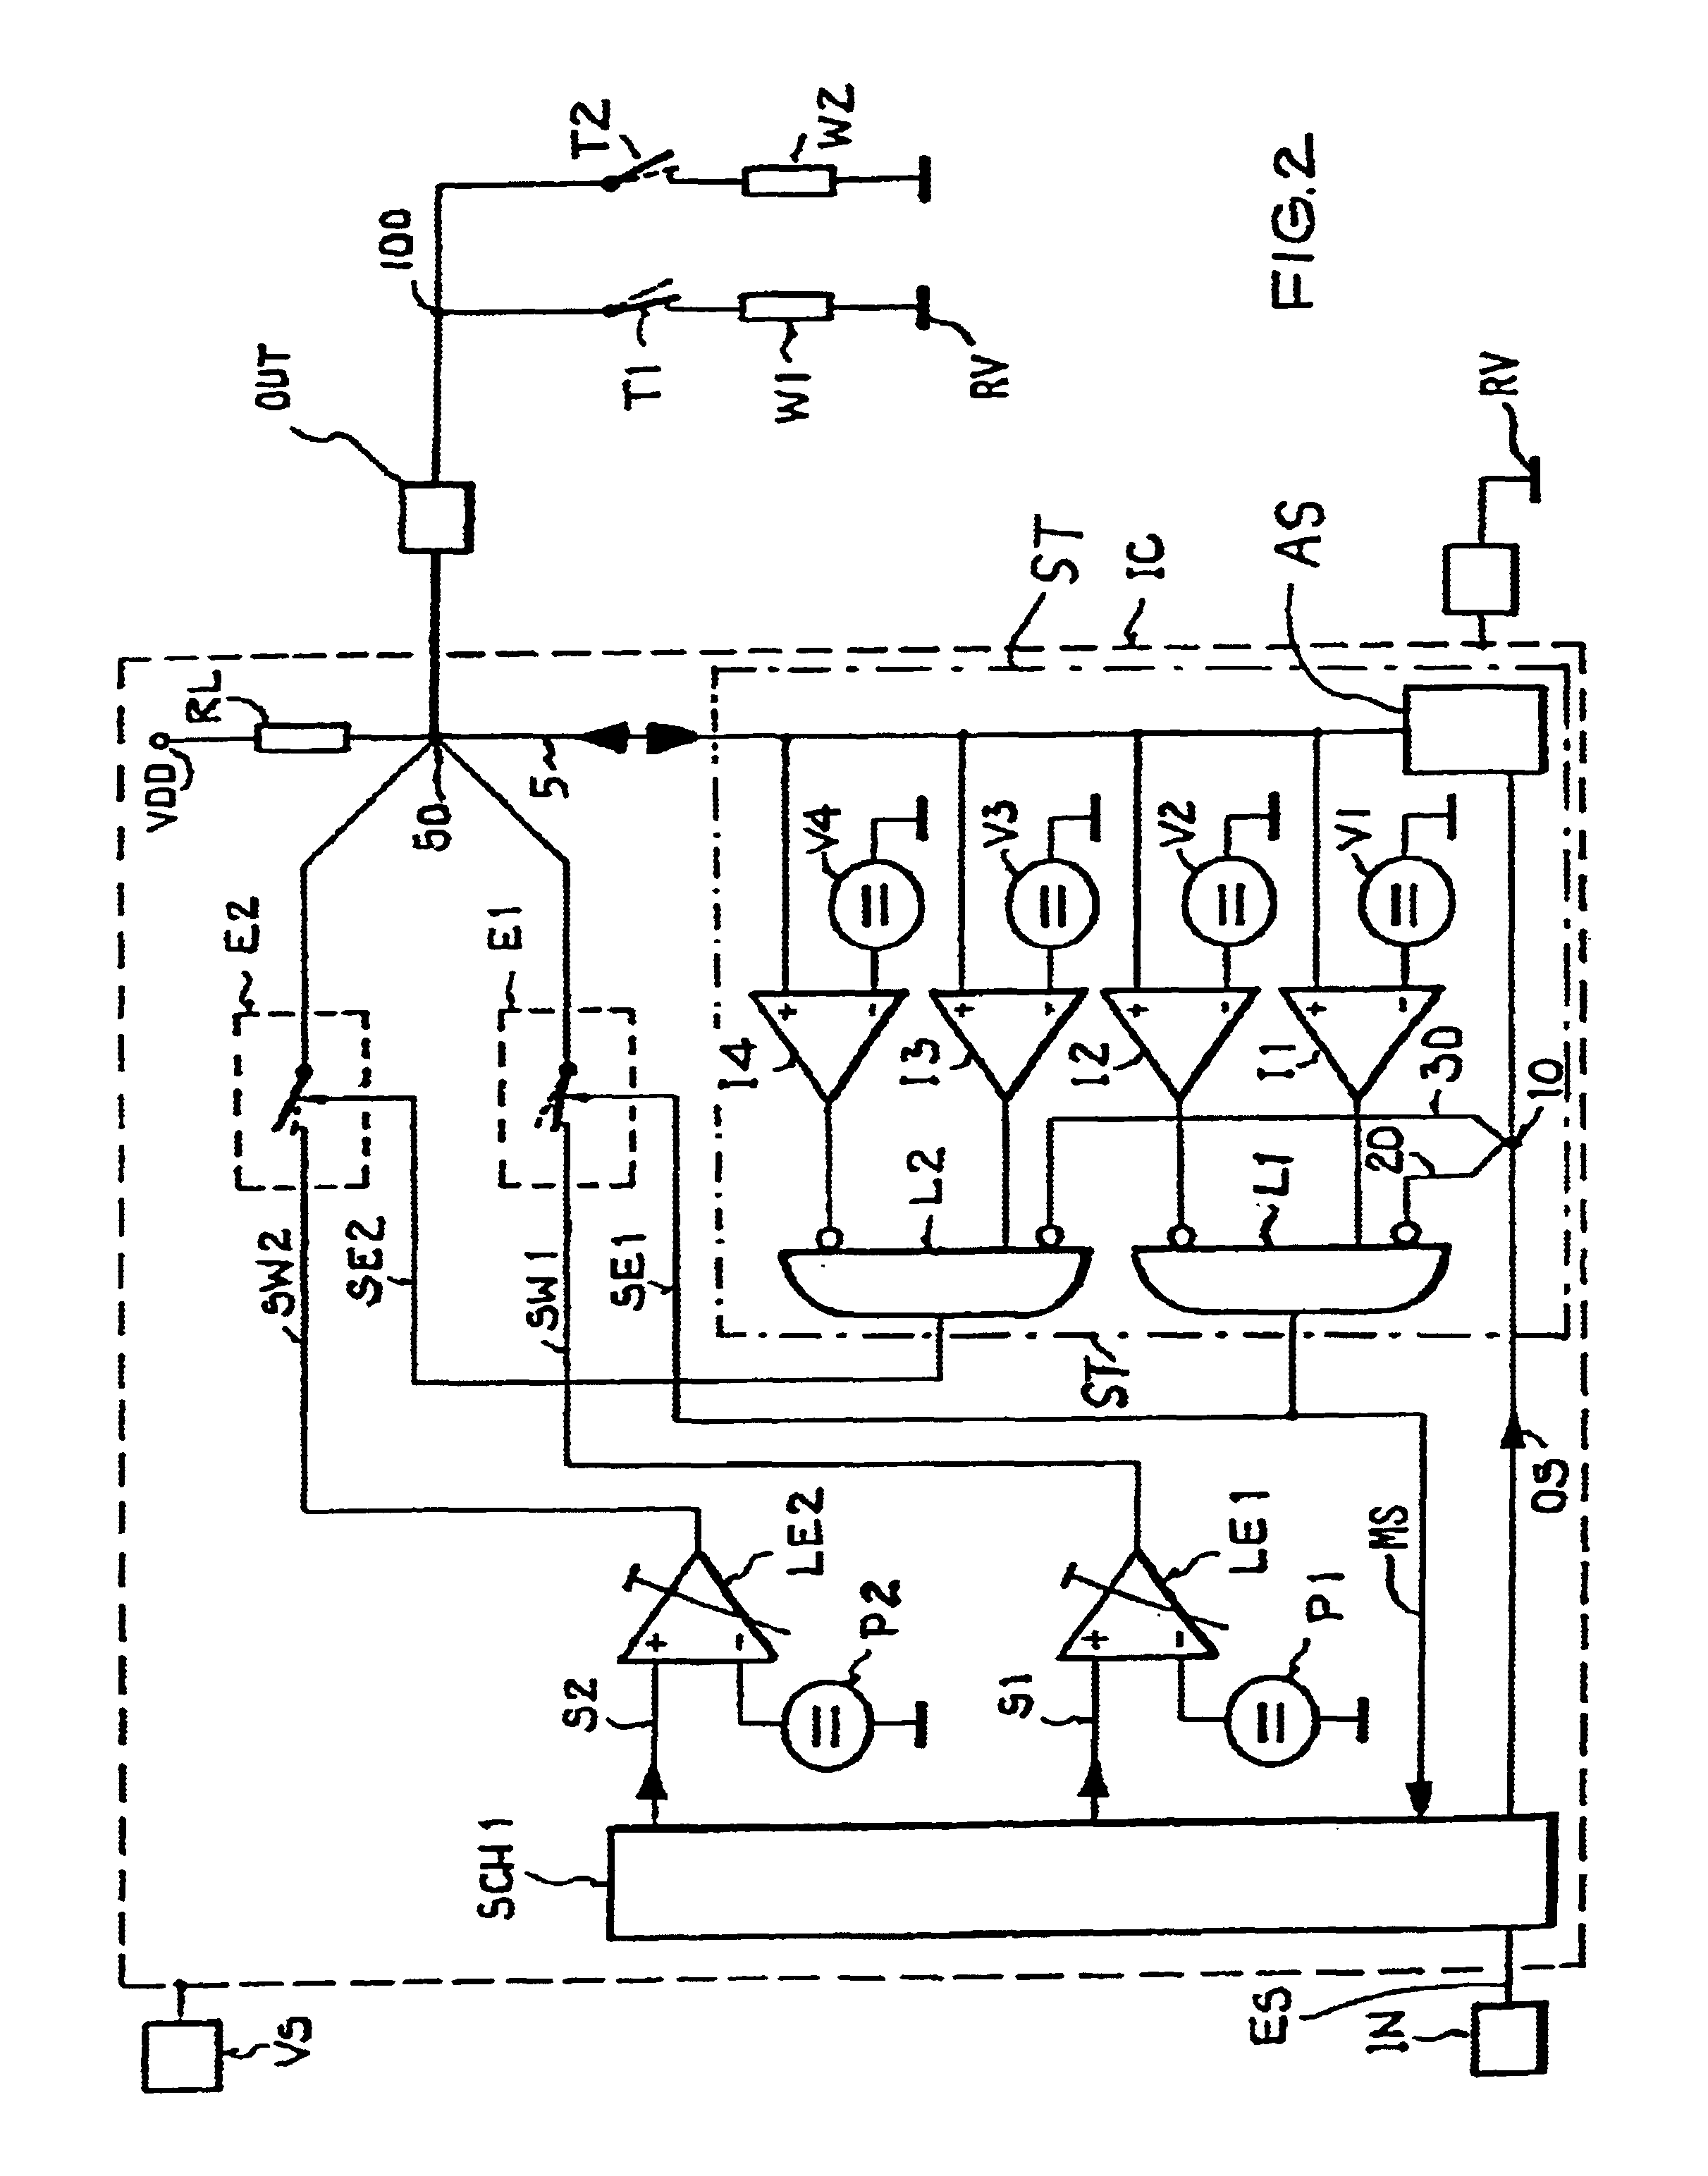 Integrated circuit that can be externally tested through a normal signal output pin